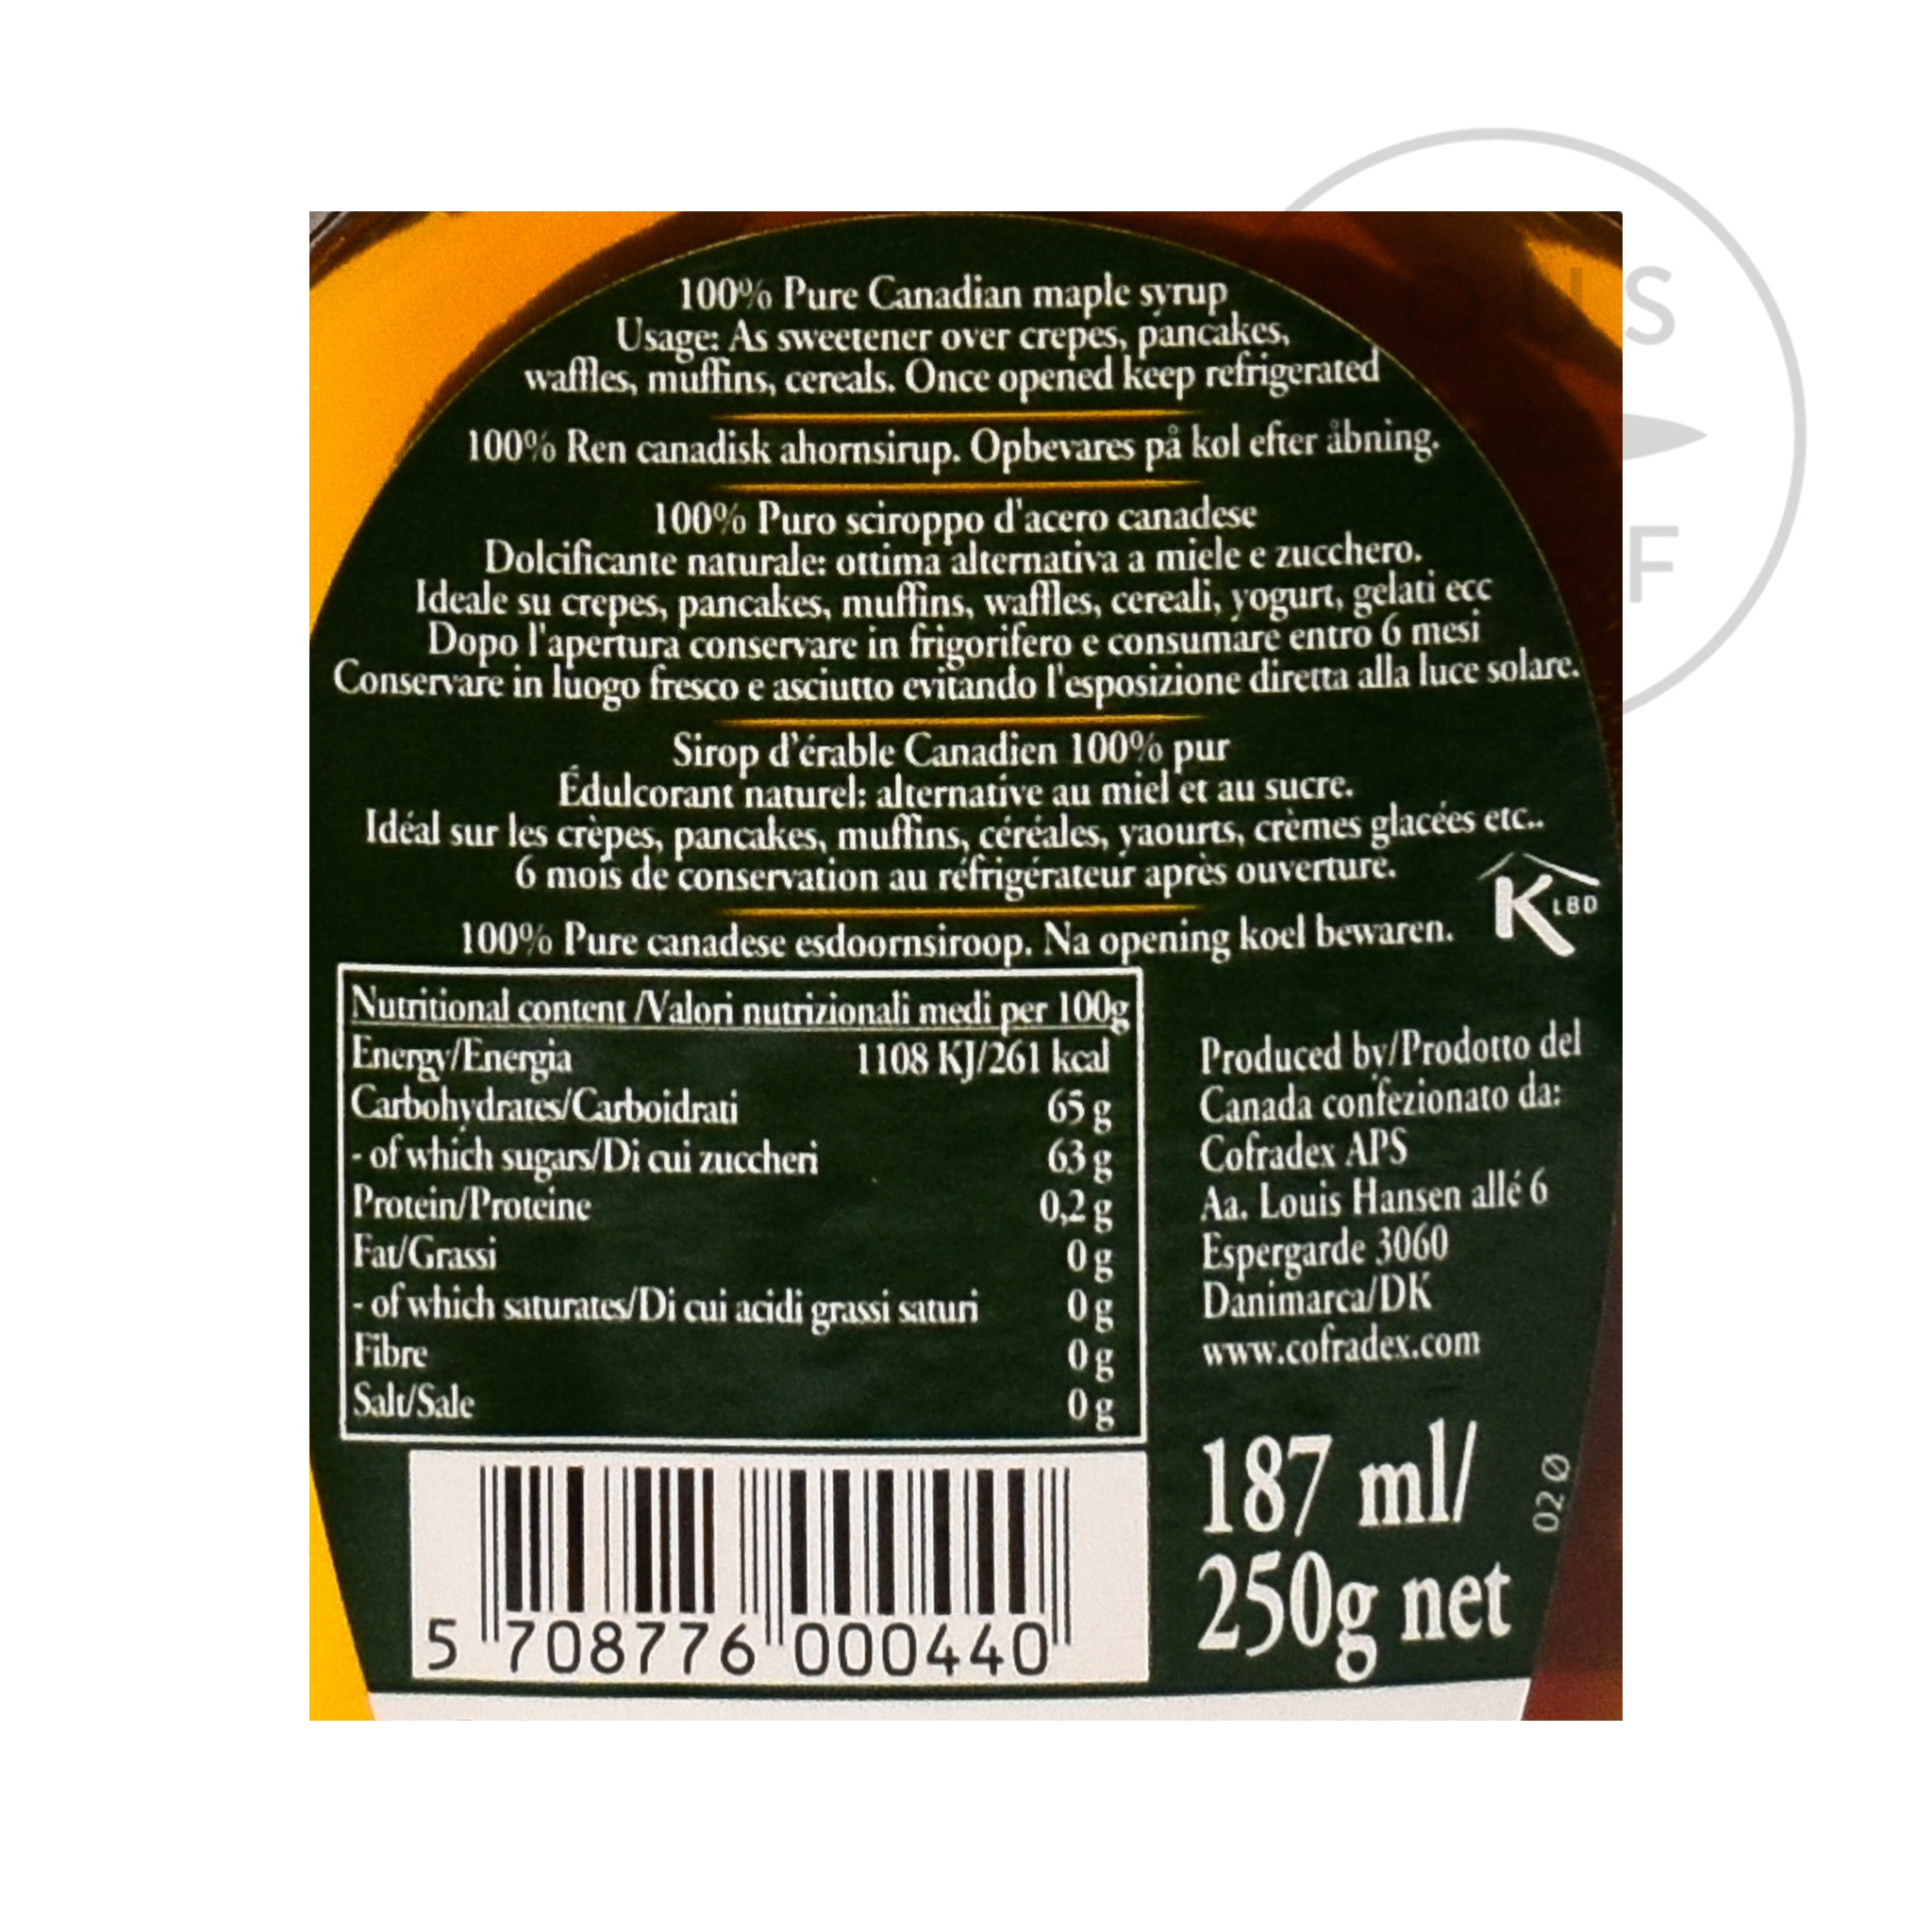 Pure Maple Syrup 187ml nutritional information ingredients